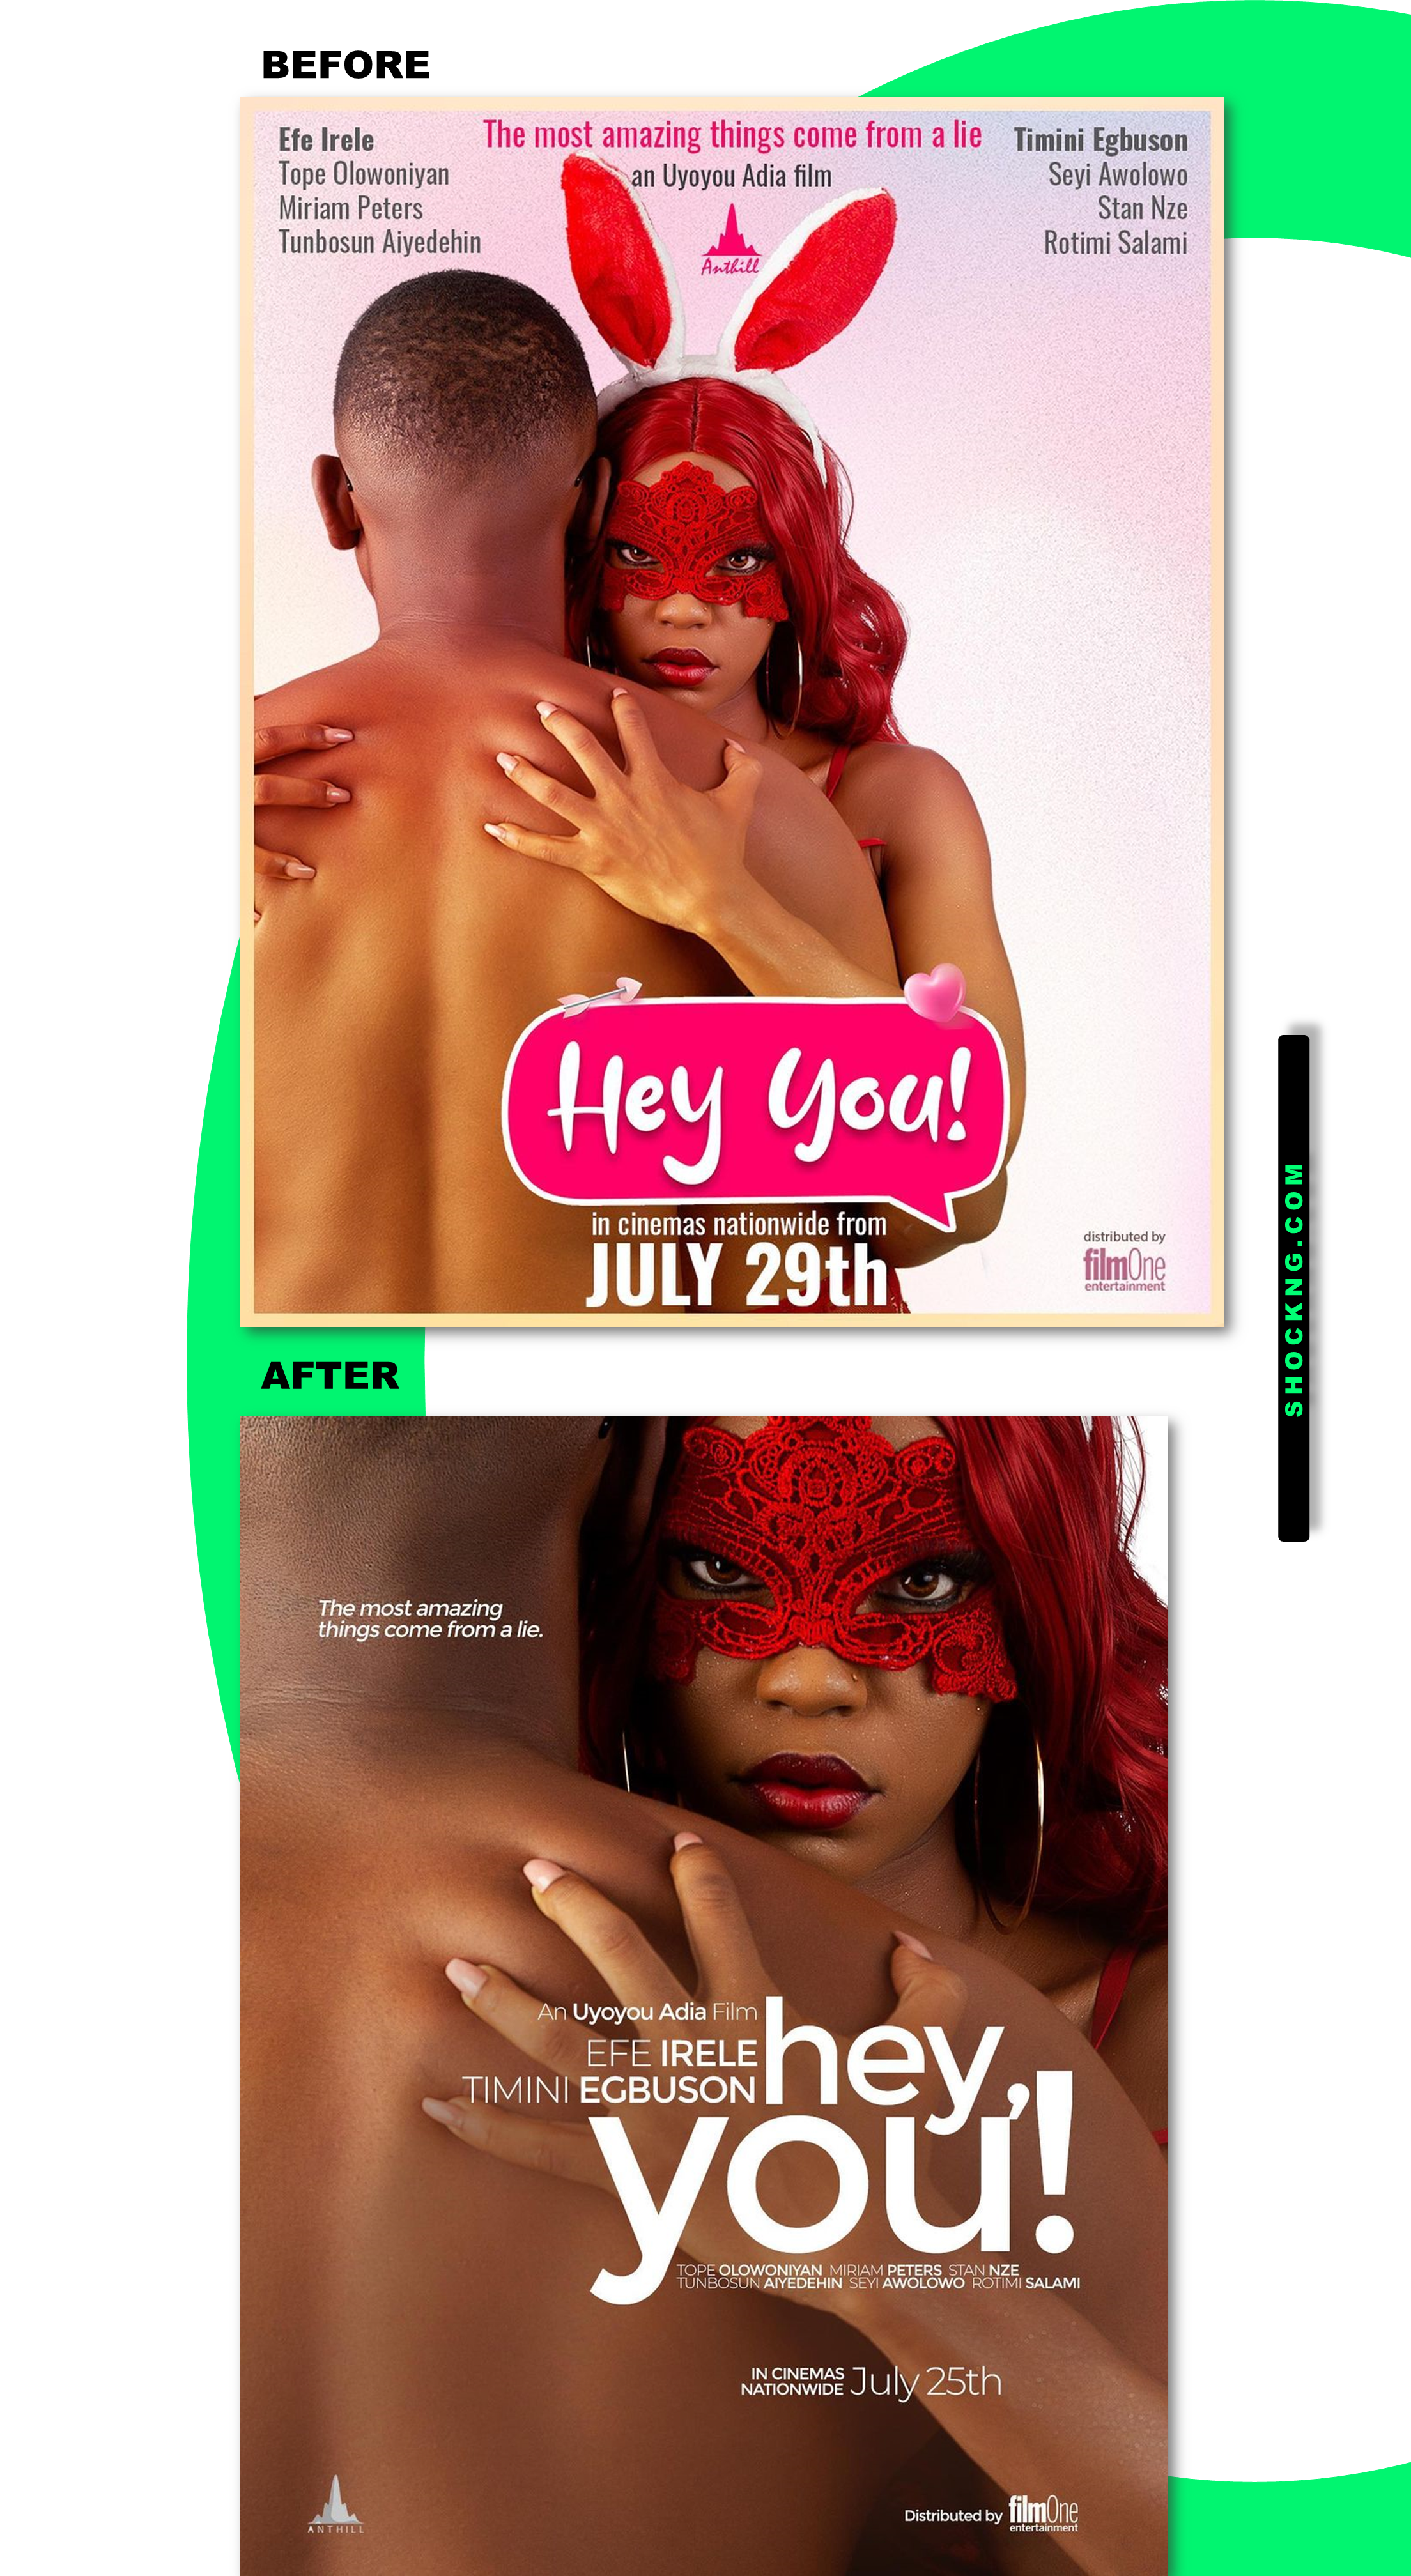 Hey You Movie poster redesign that went viral - How Tomi Wale Made “Hey You” Movie Posters Go Viral After a Visual Redesign